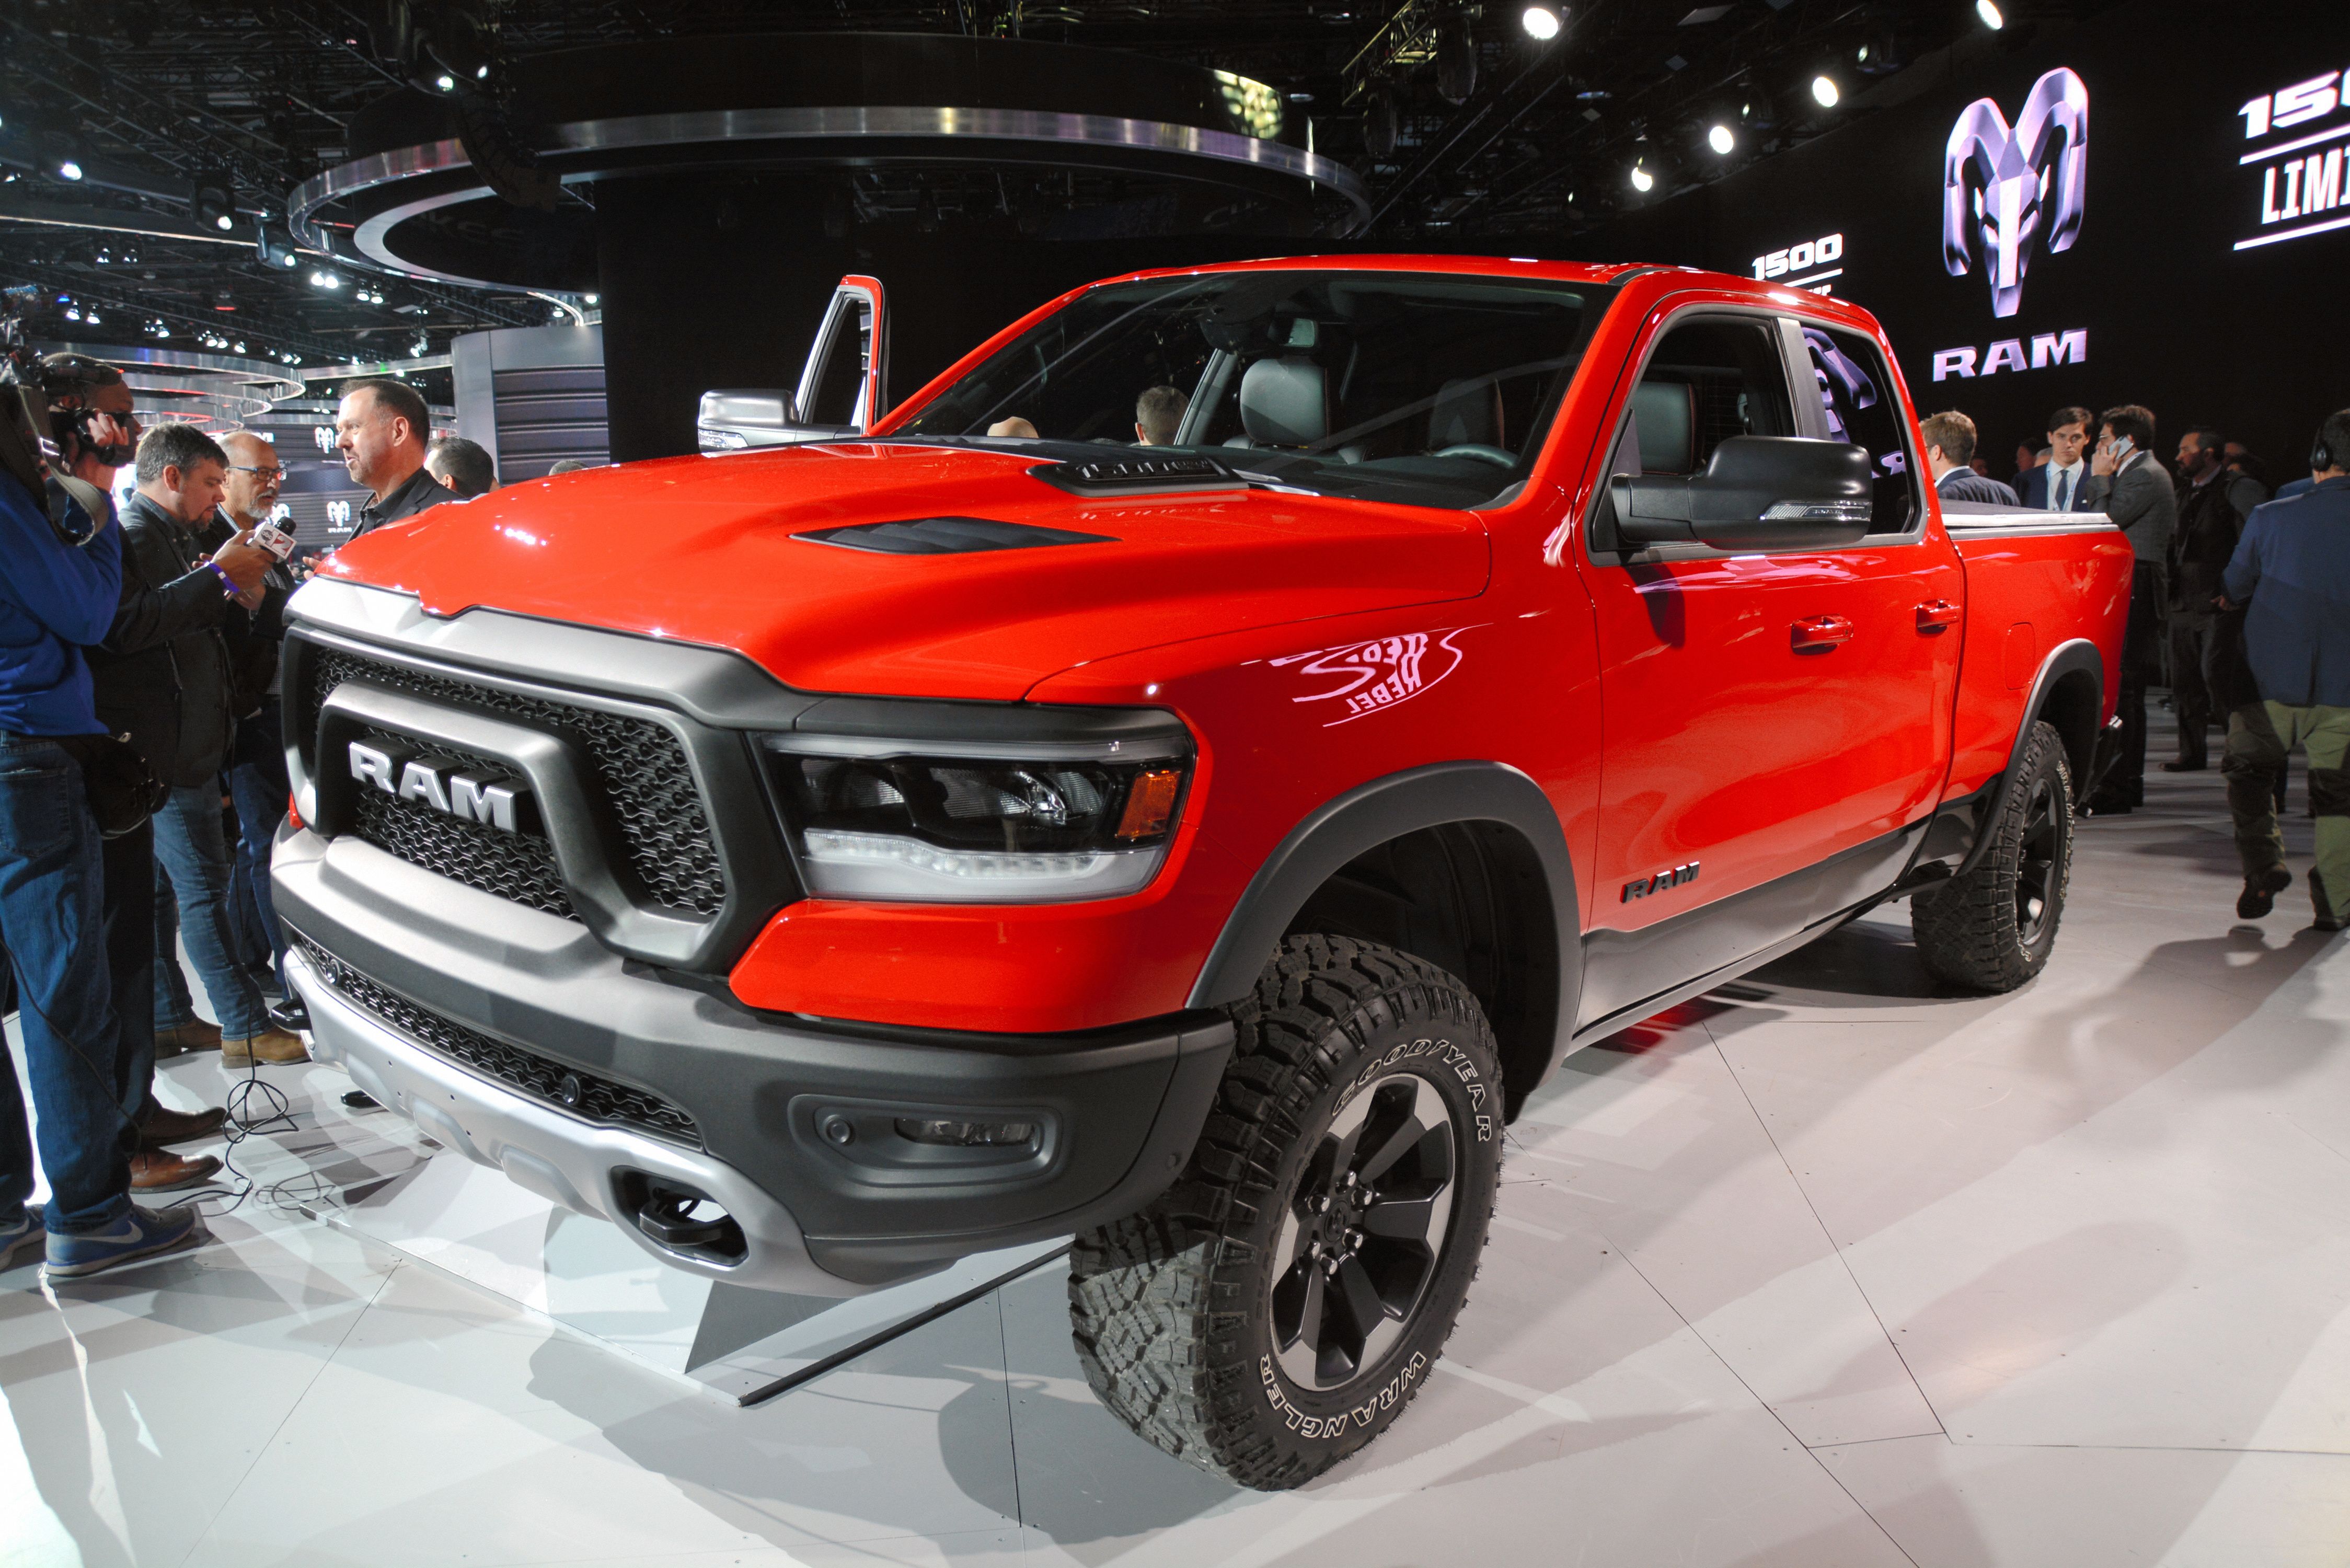 Fiat Chrysler stock down after Goldman Sachs initiates with sell rating